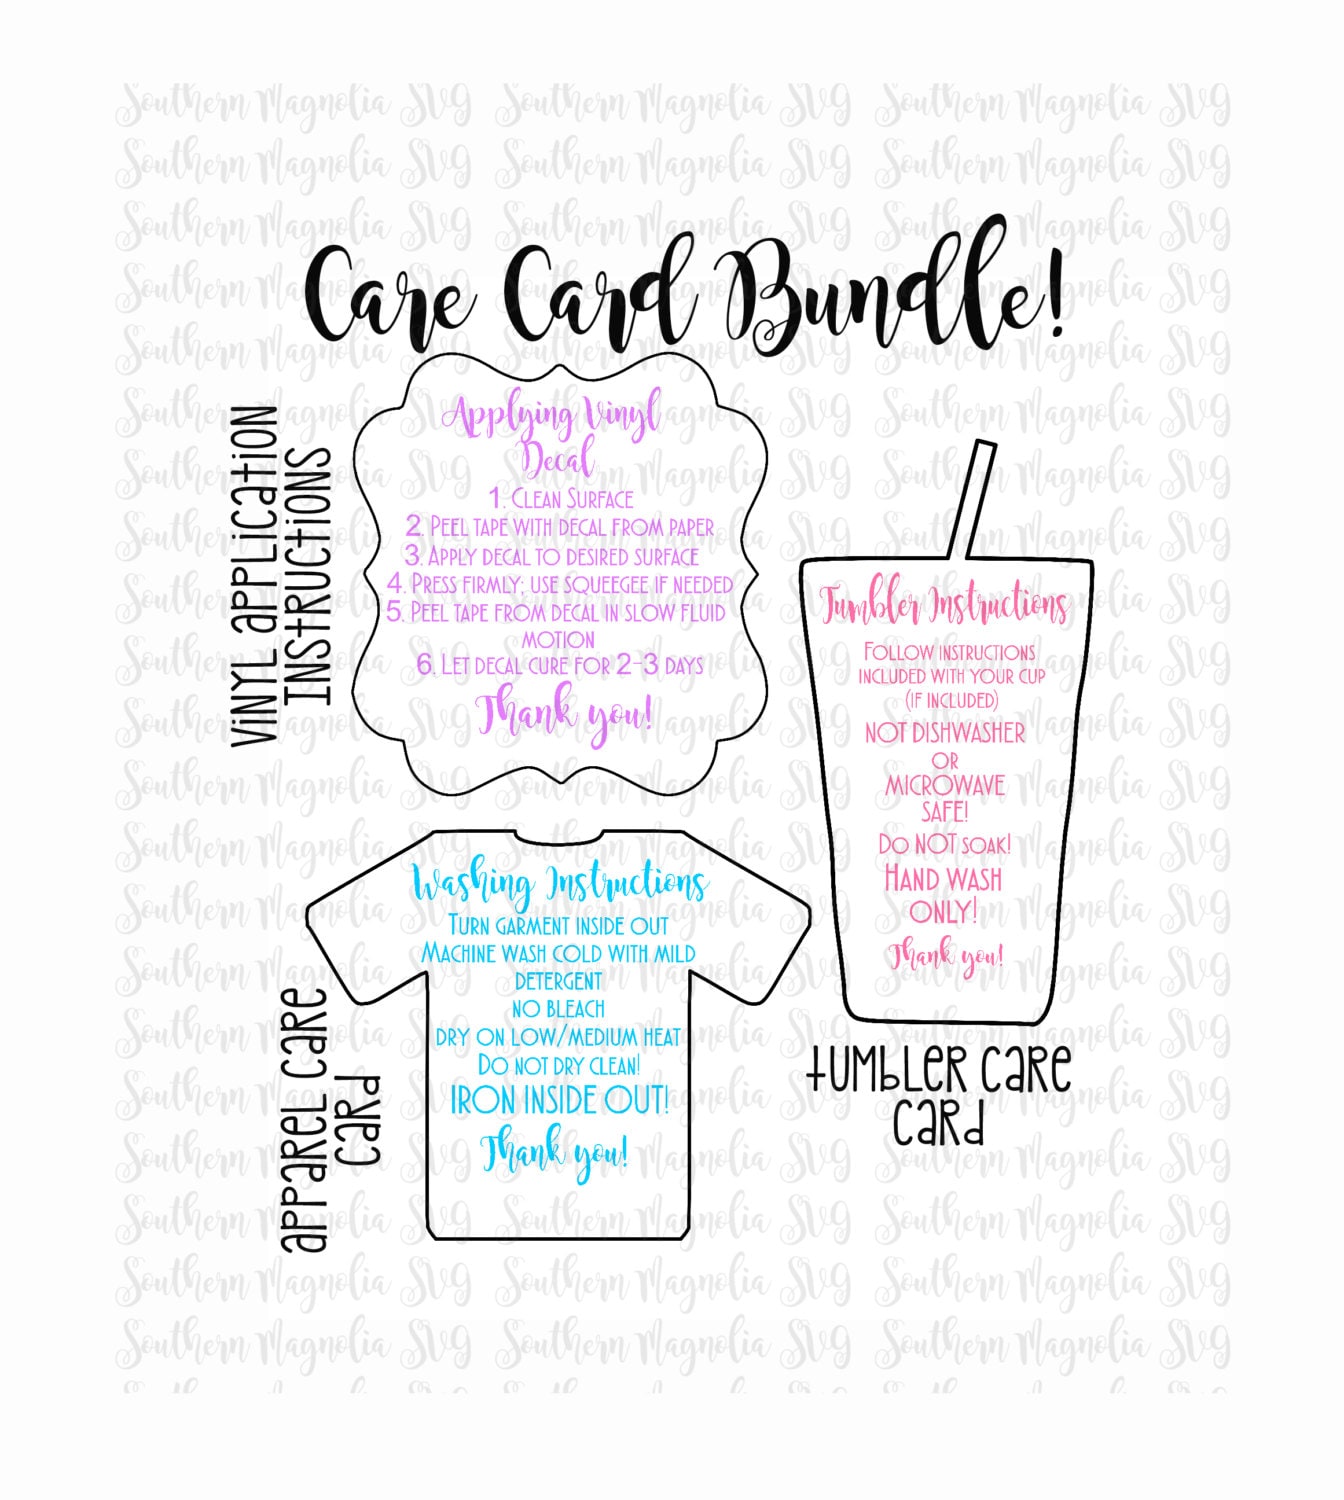 Download Care Card Instructions BUNDLE Apply Vinyl Decal Print and